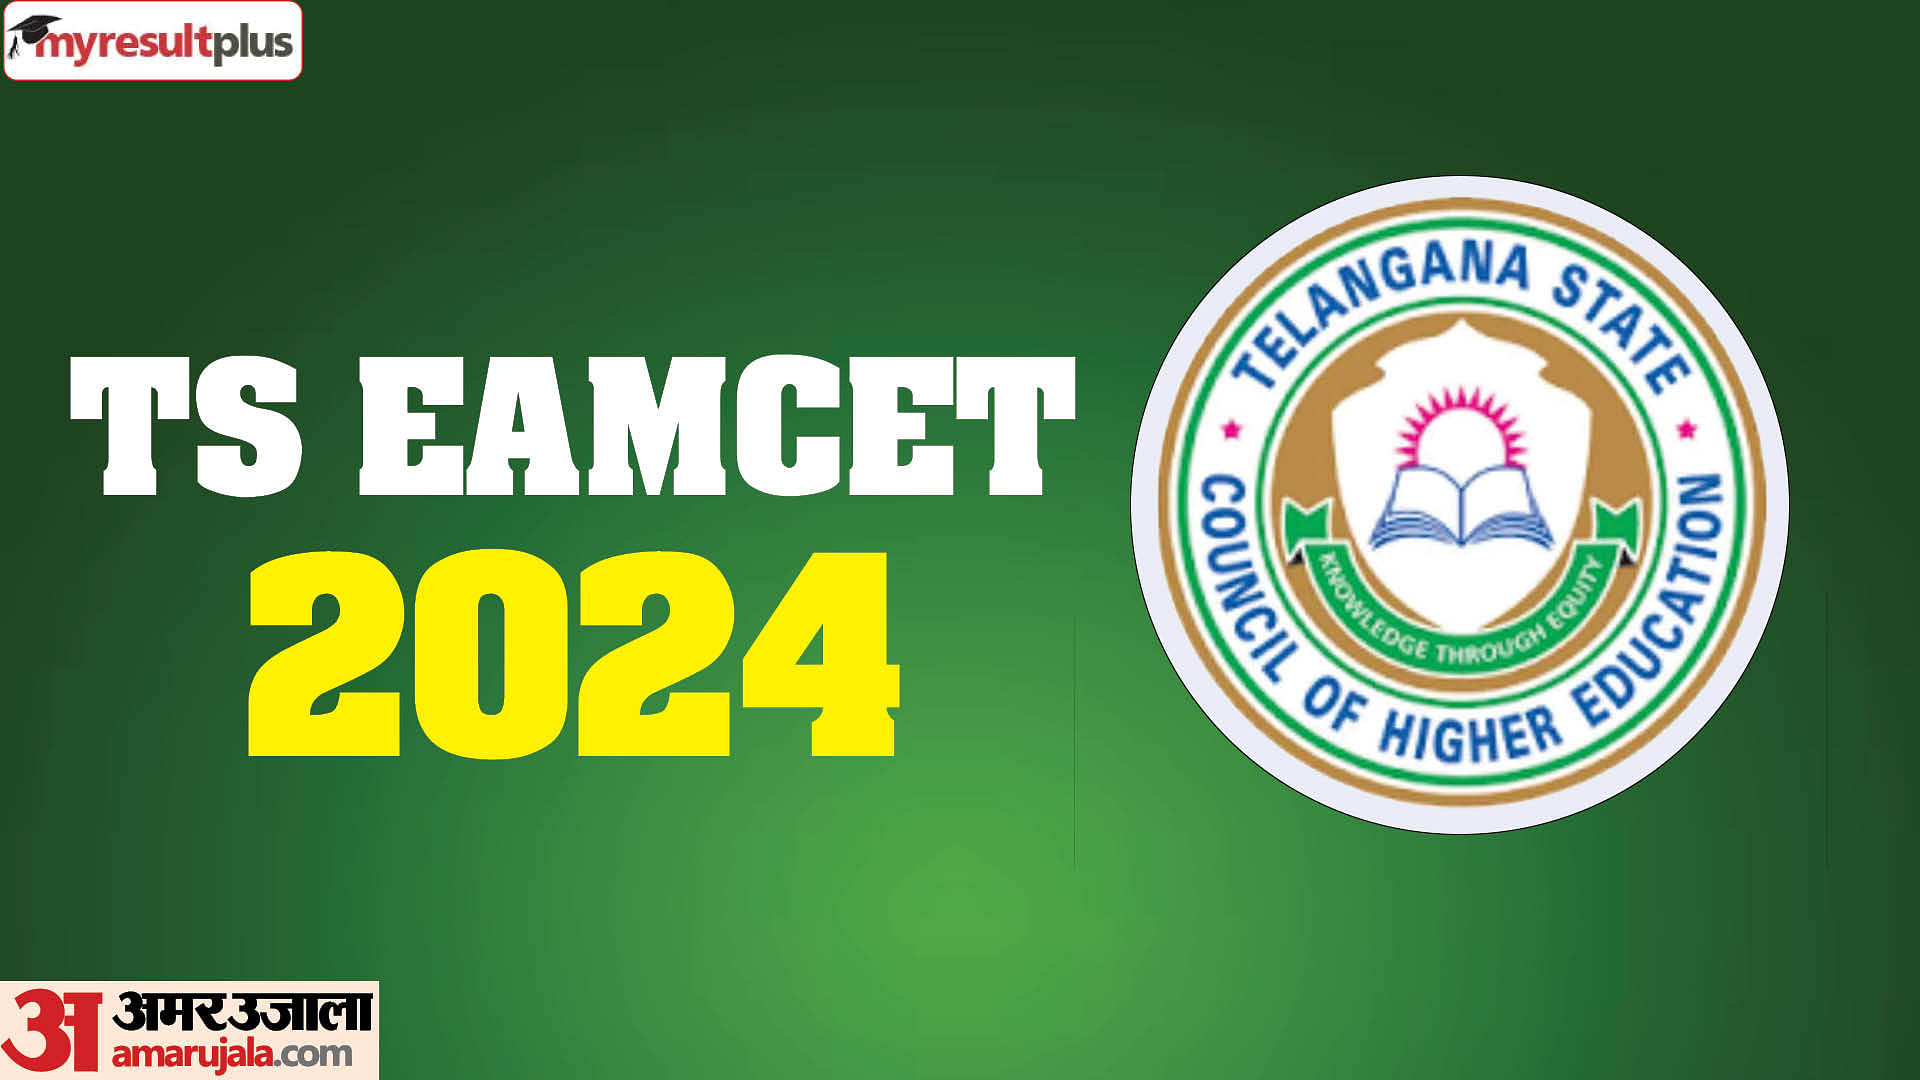 TS EAMCET 2024 counselling schedule out, Check dates and other details here